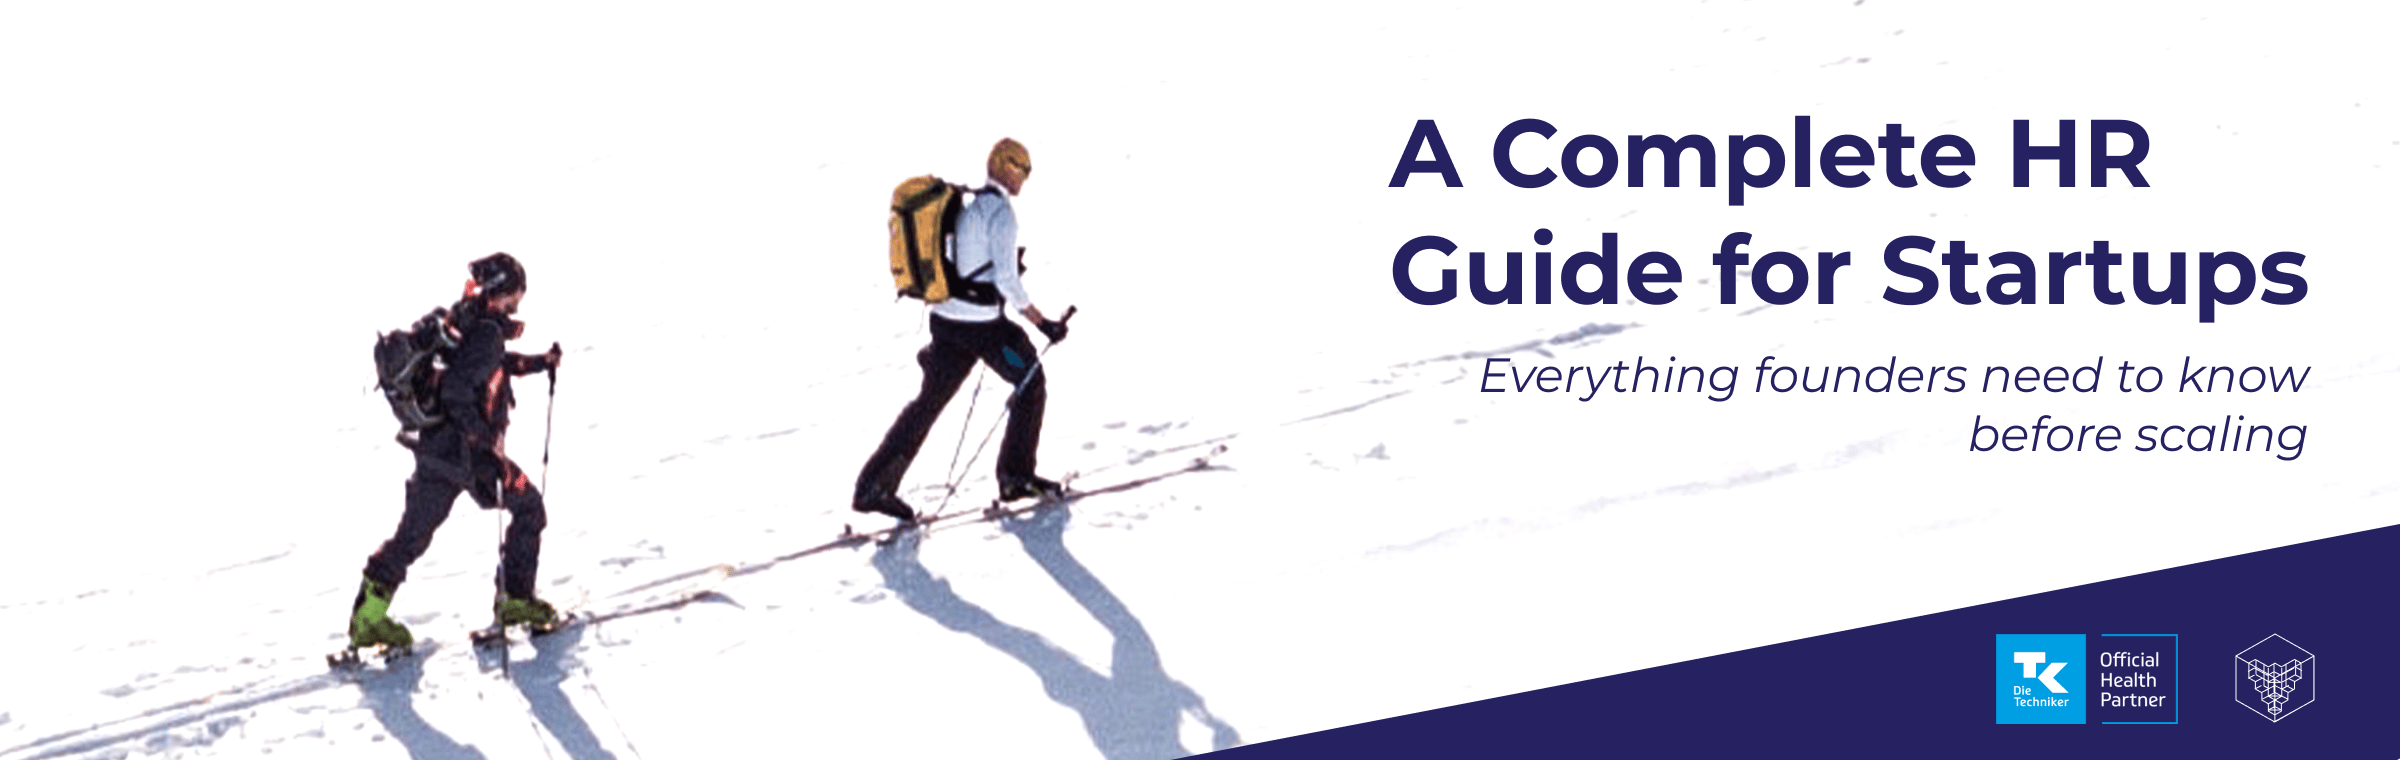 A complete HR guide for startups cover